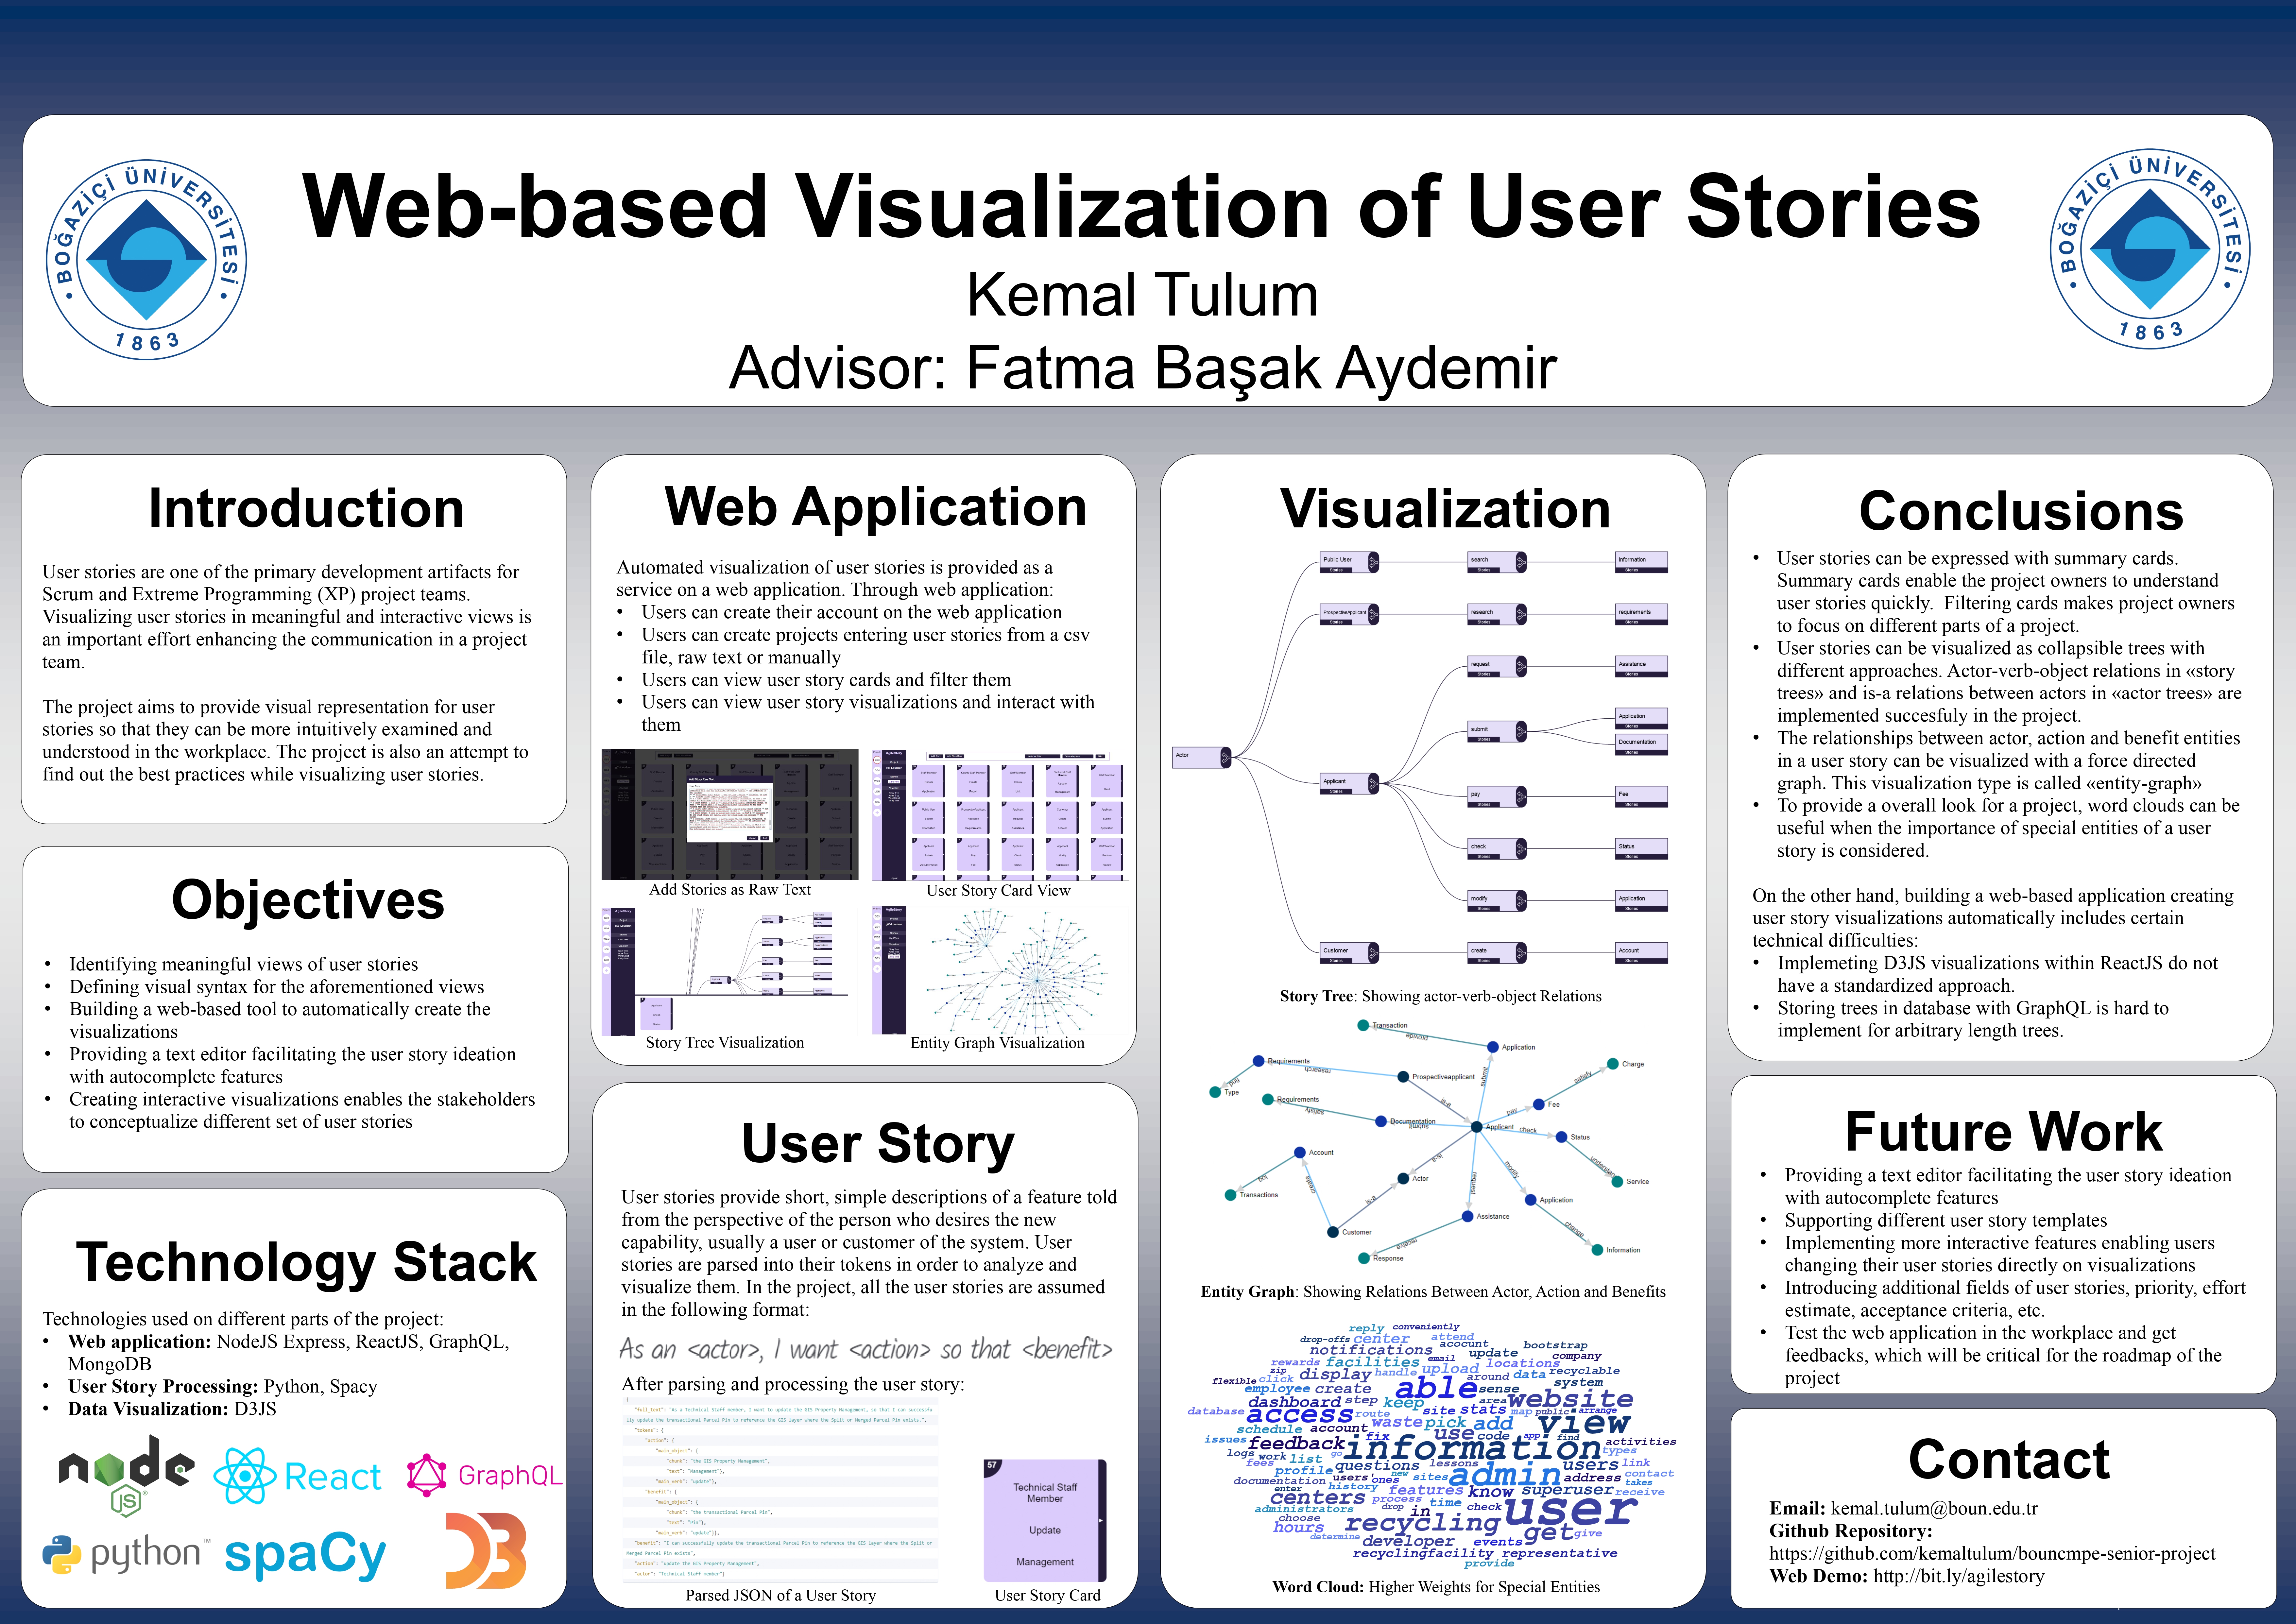 Web-based Visualization of User Stories.